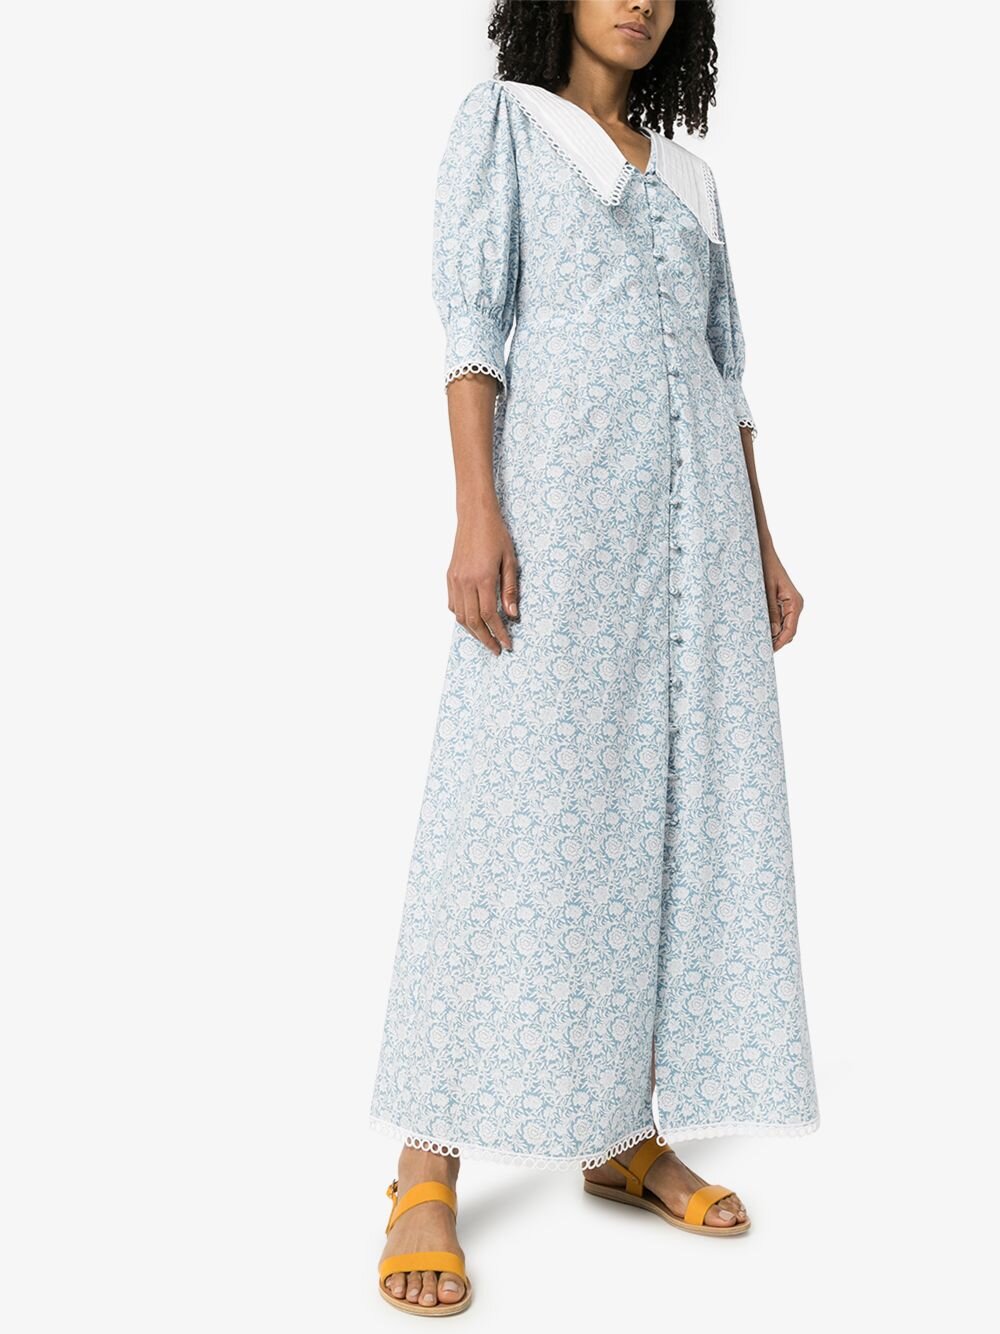 THE PRAIRIE DRESS TREND Timeless dresses to buy now and wear forever ...